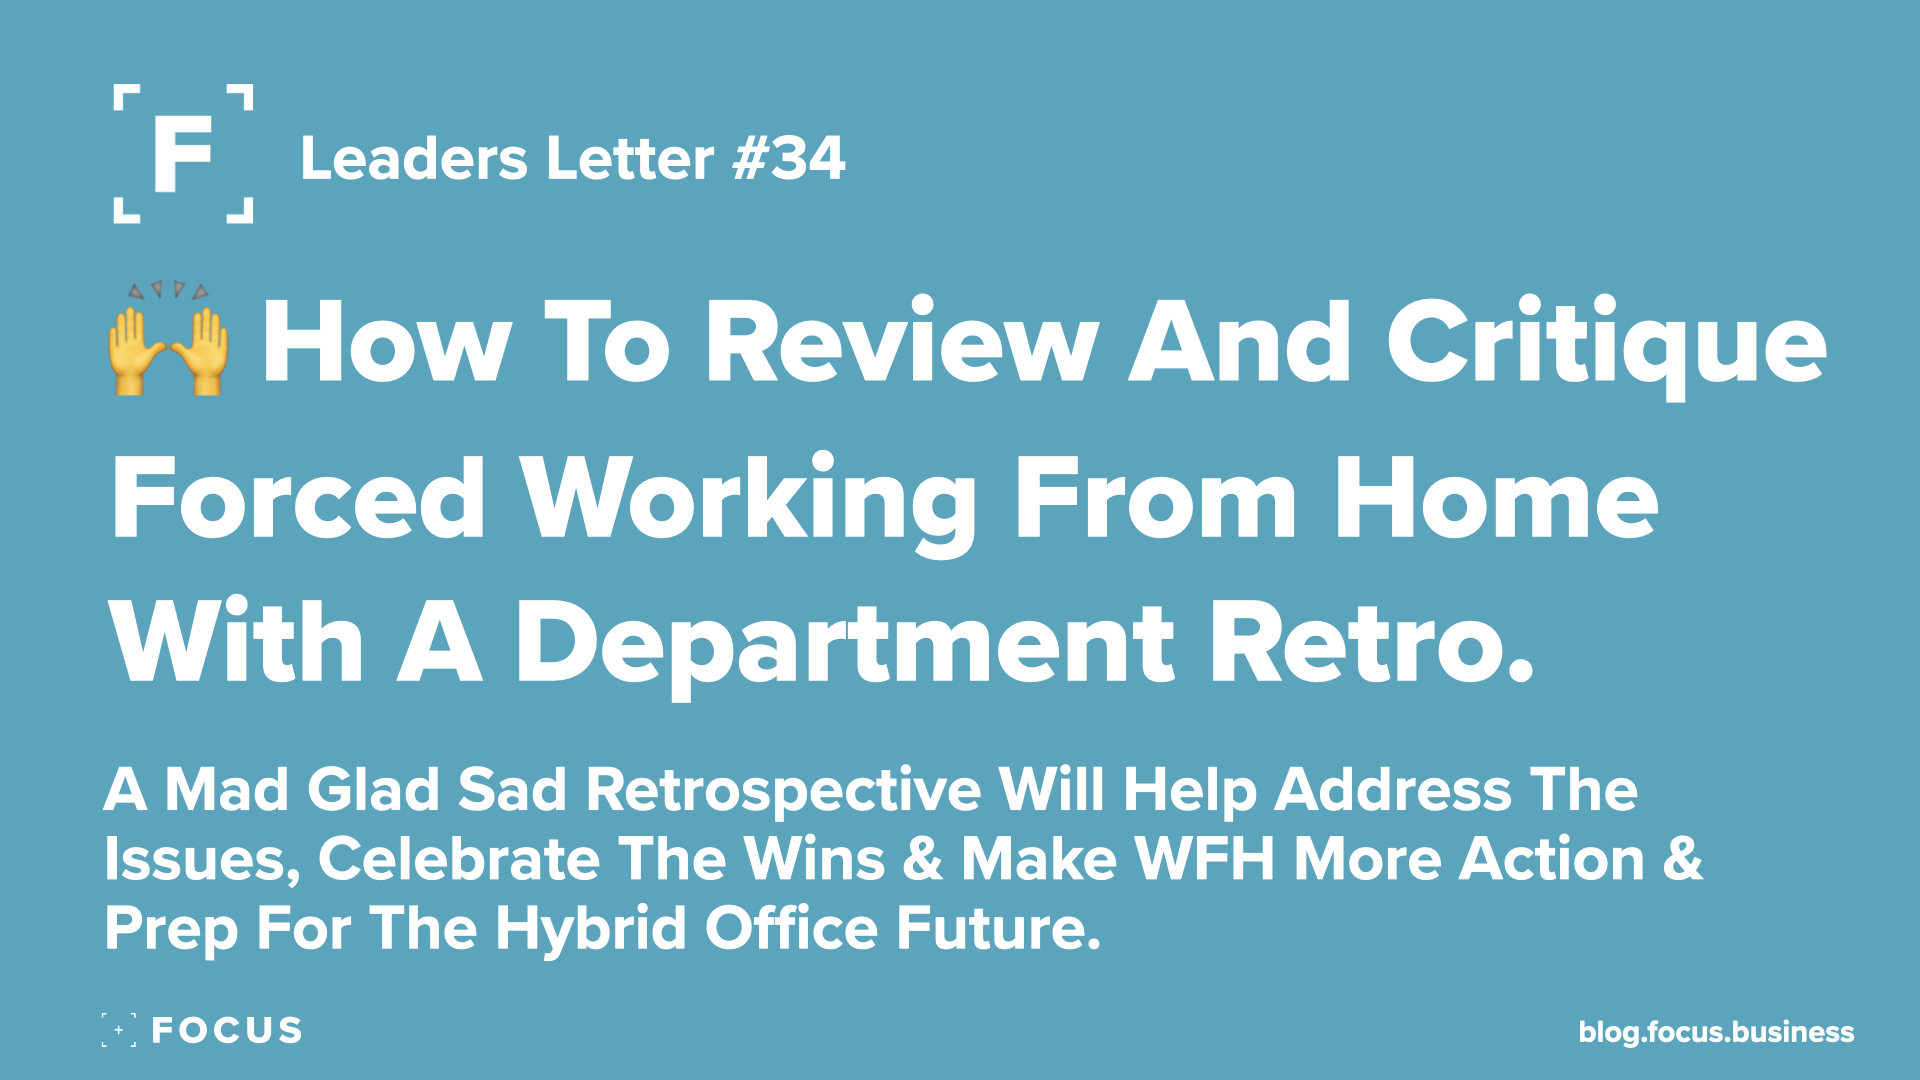 How To Review And Critique Forced Working From Home With A Department Retro